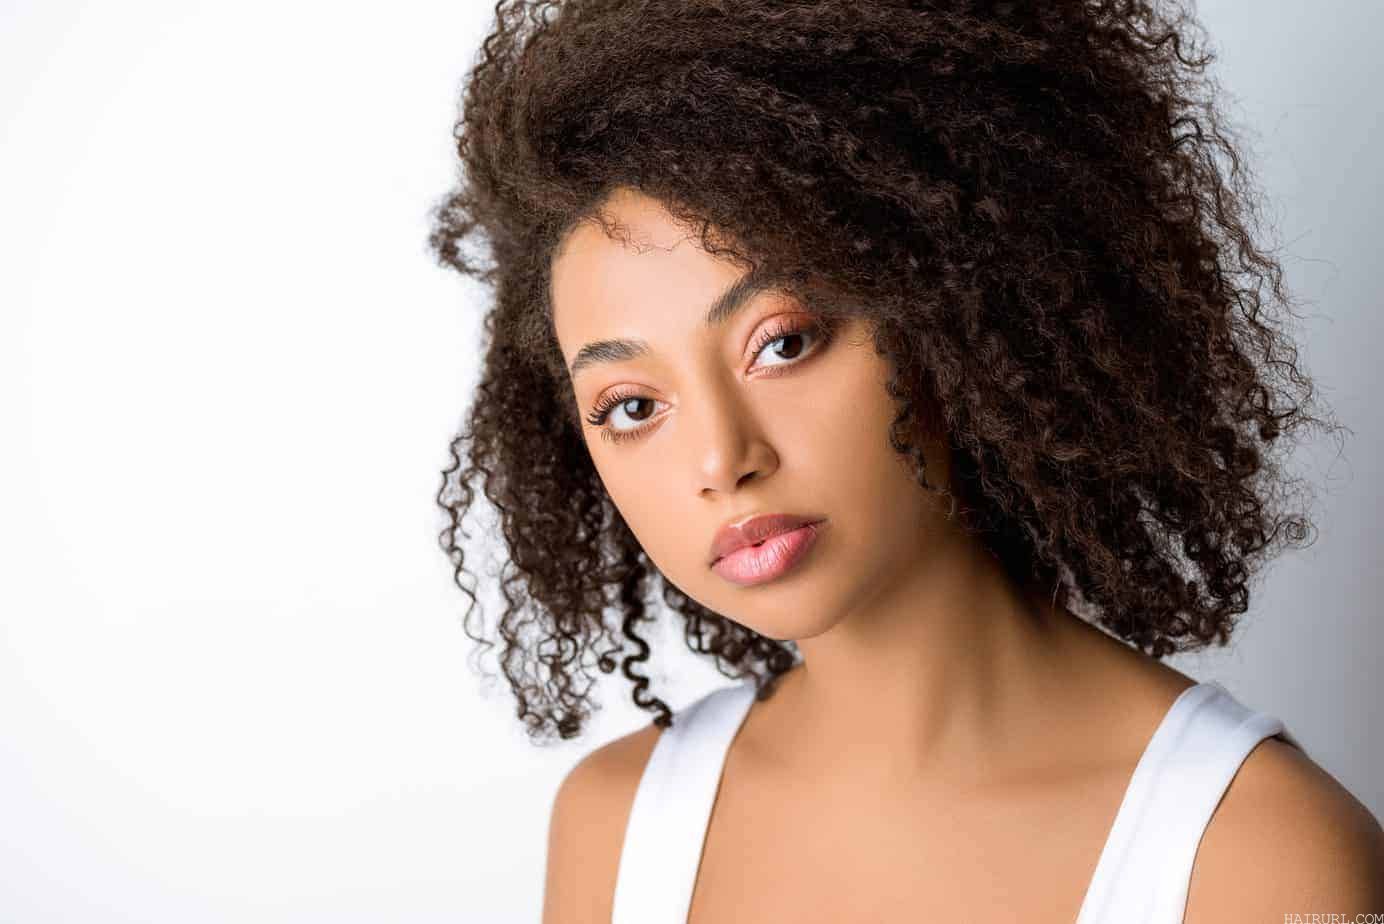 mixed race female looking directly into the camera wearing red lipstick, eye shadow and a white tank top